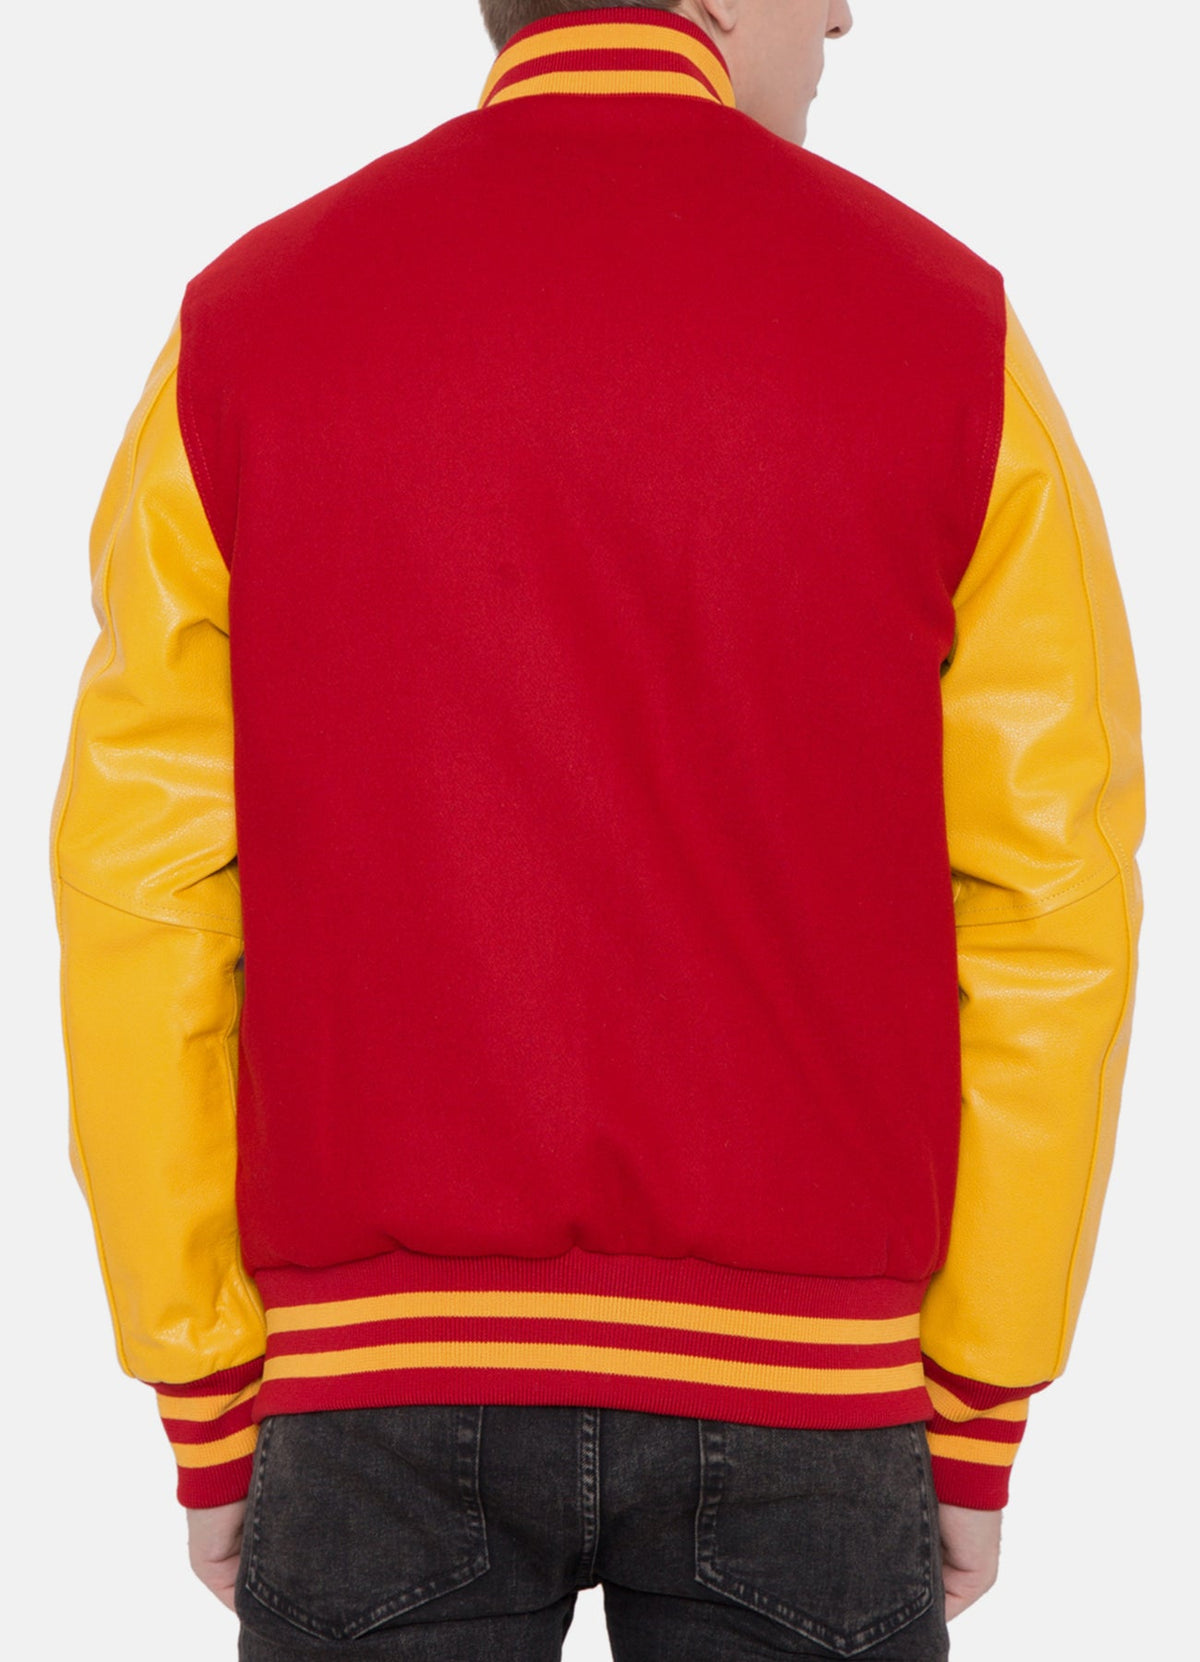 Mens Iconic Red and Yellow Varsity Jacket